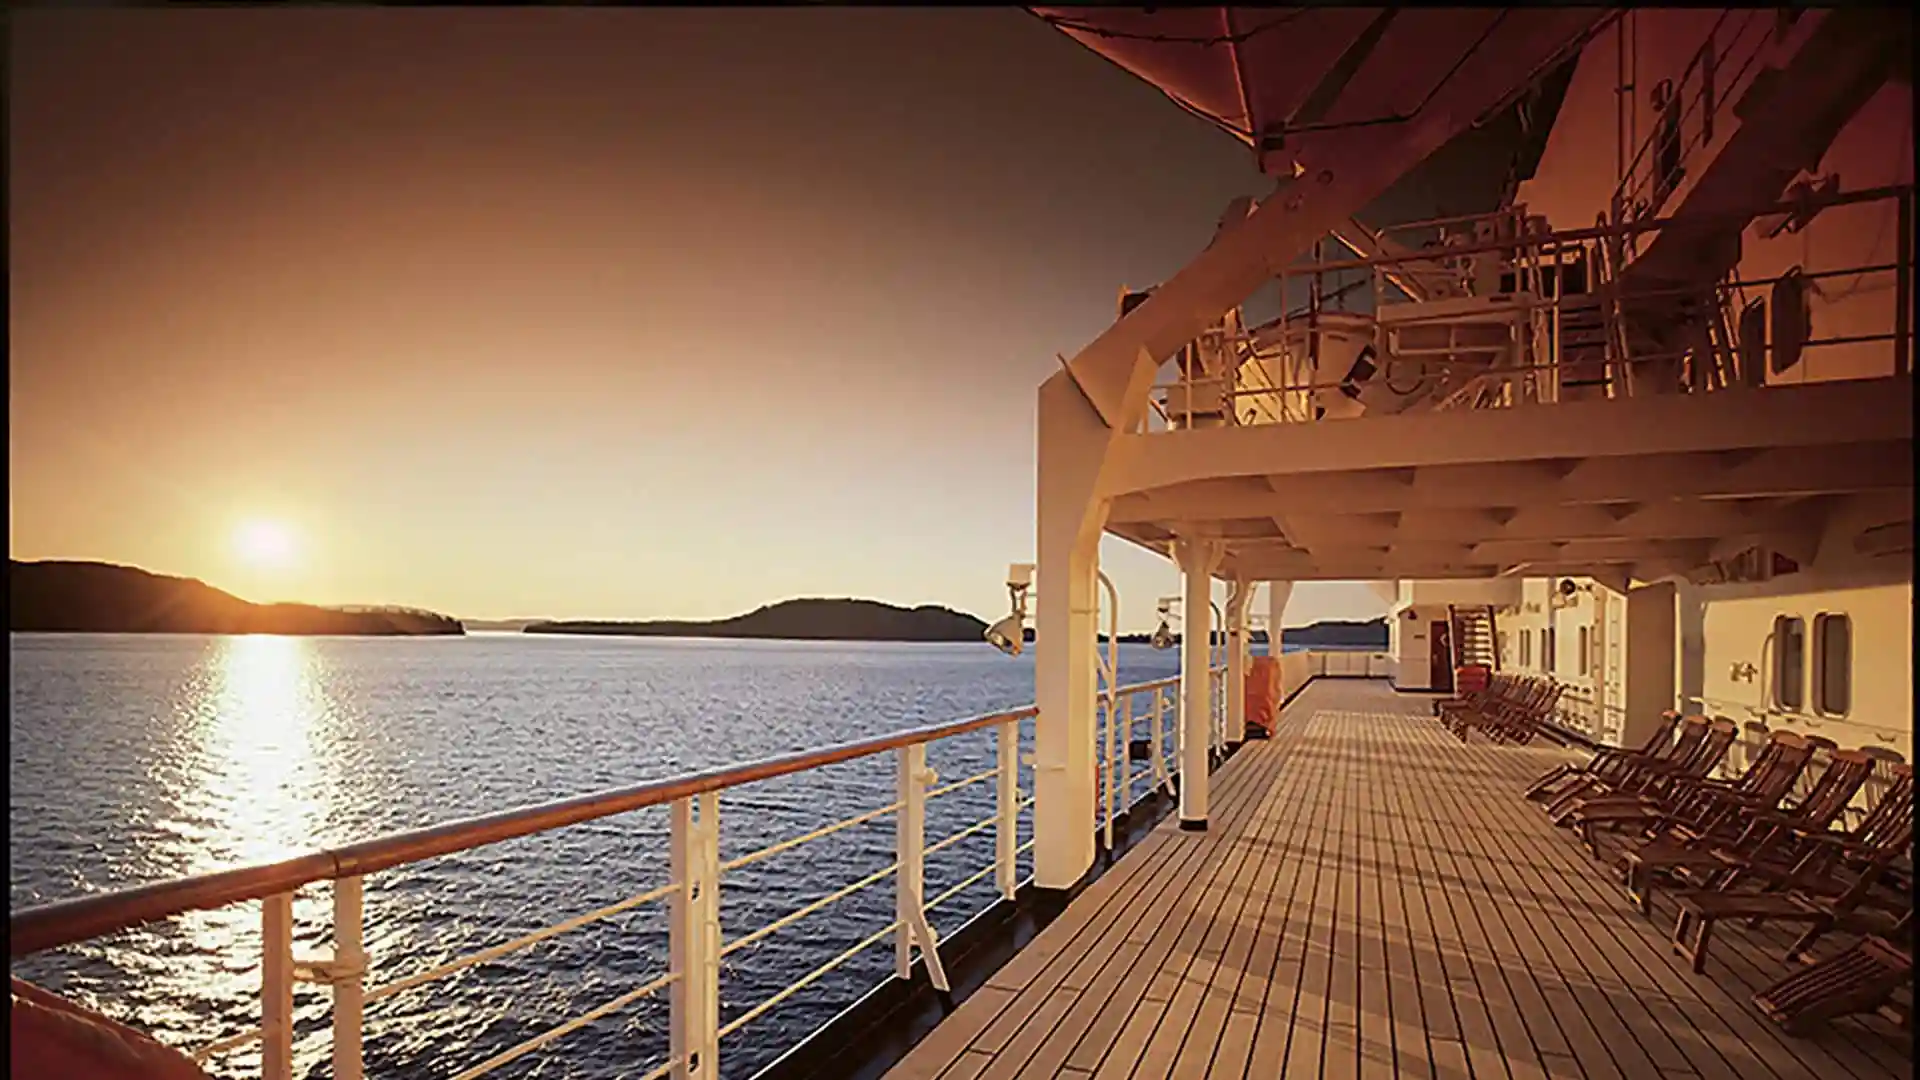 View of deck on cruise ship during sunrise.